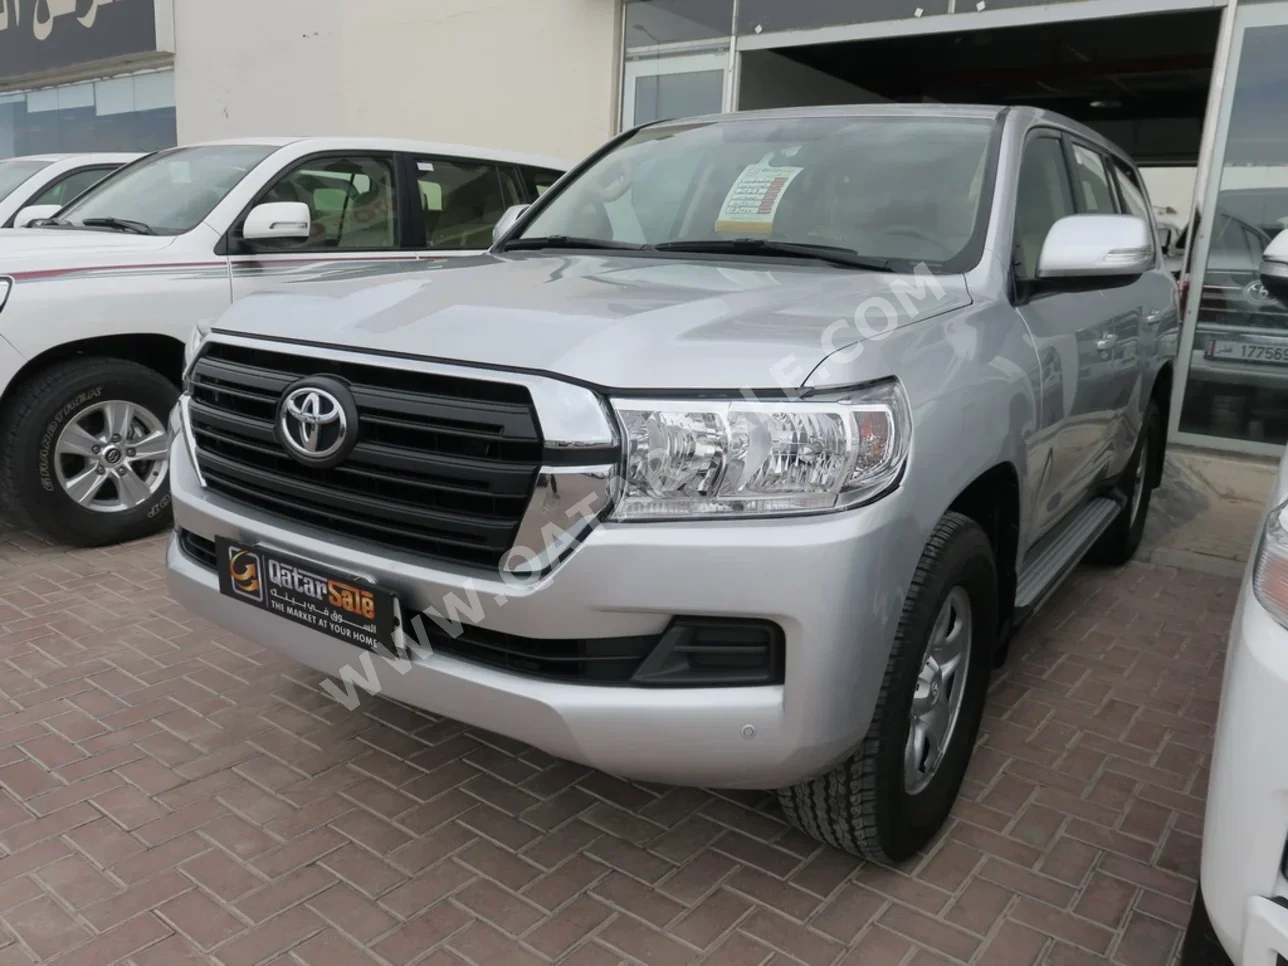  Toyota  Land Cruiser  G  2021  Automatic  80,000 Km  6 Cylinder  Four Wheel Drive (4WD)  SUV  Silver  With Warranty